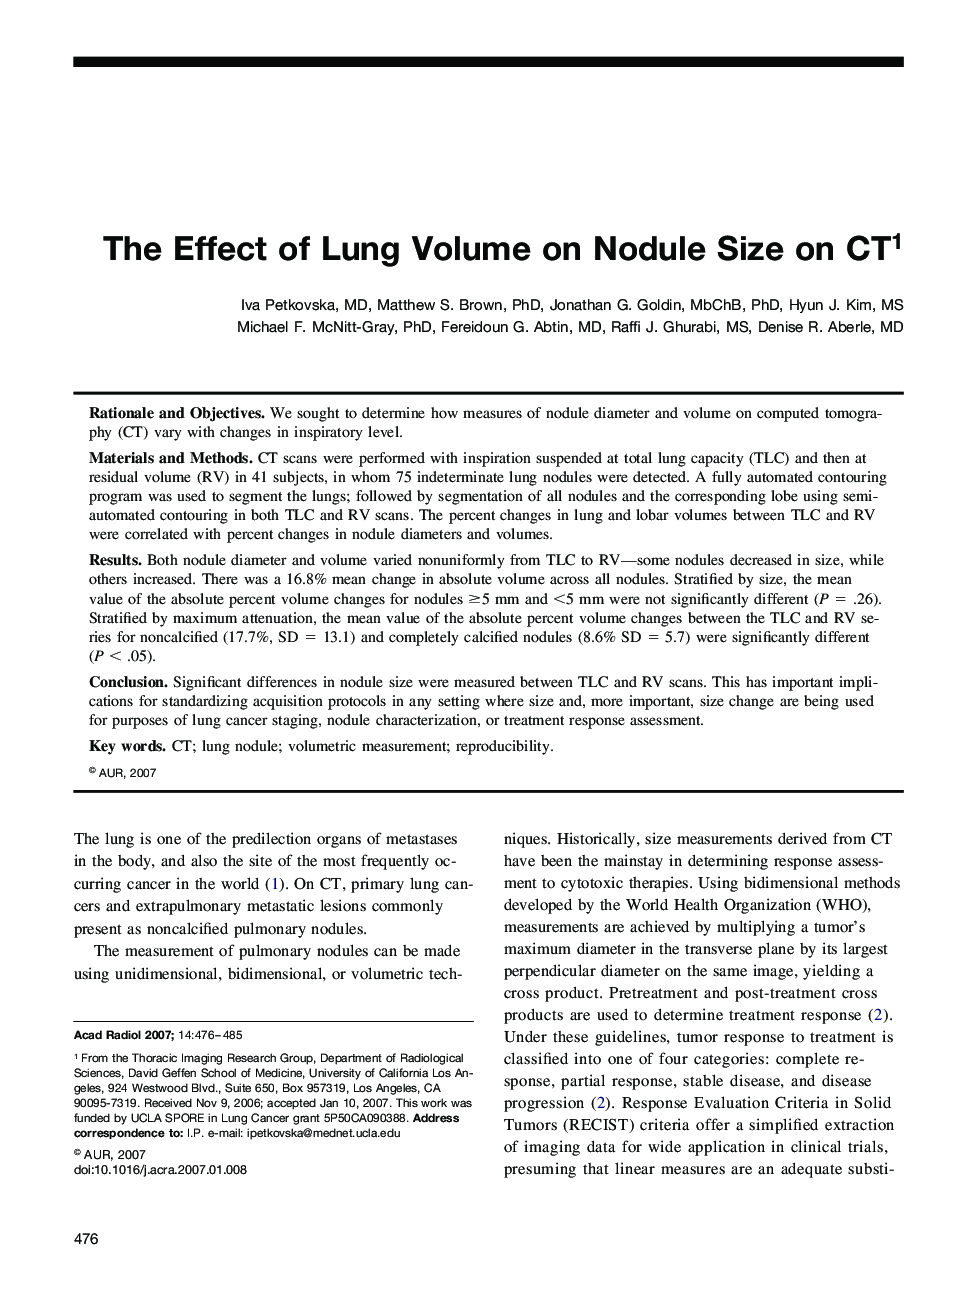 The Effect of Lung Volume on Nodule Size on CT